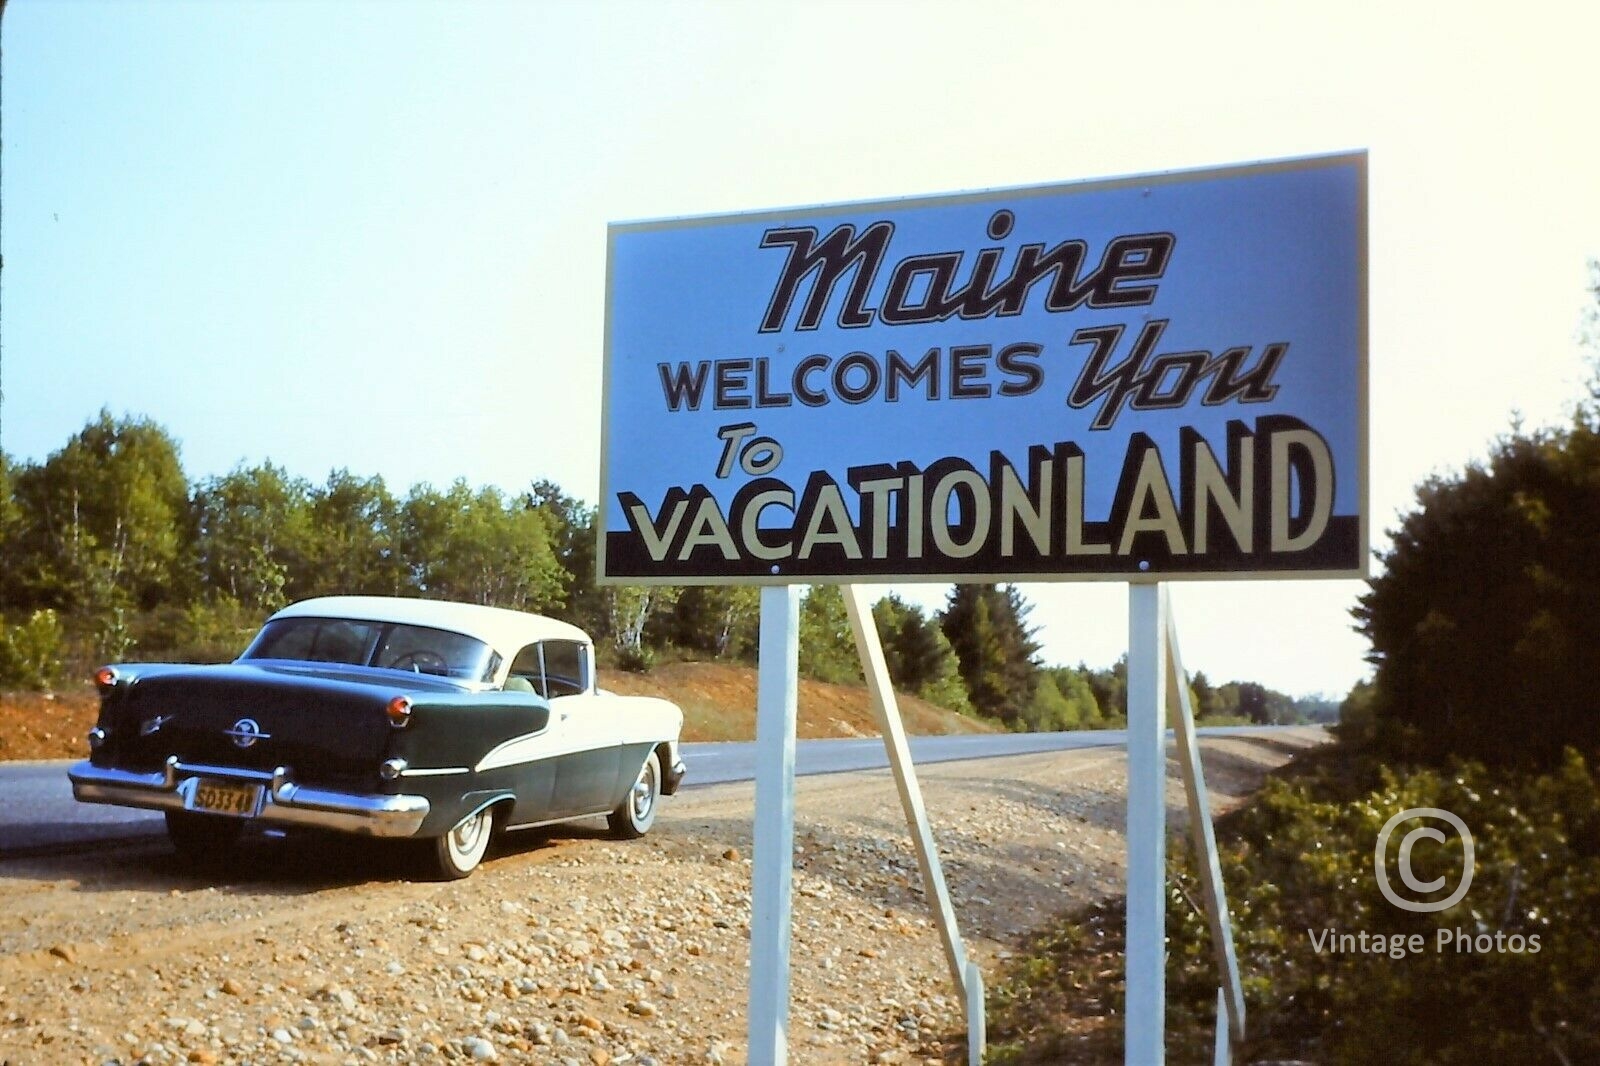 1955 American Classic Car - Welcome to Maine - Vacation Land